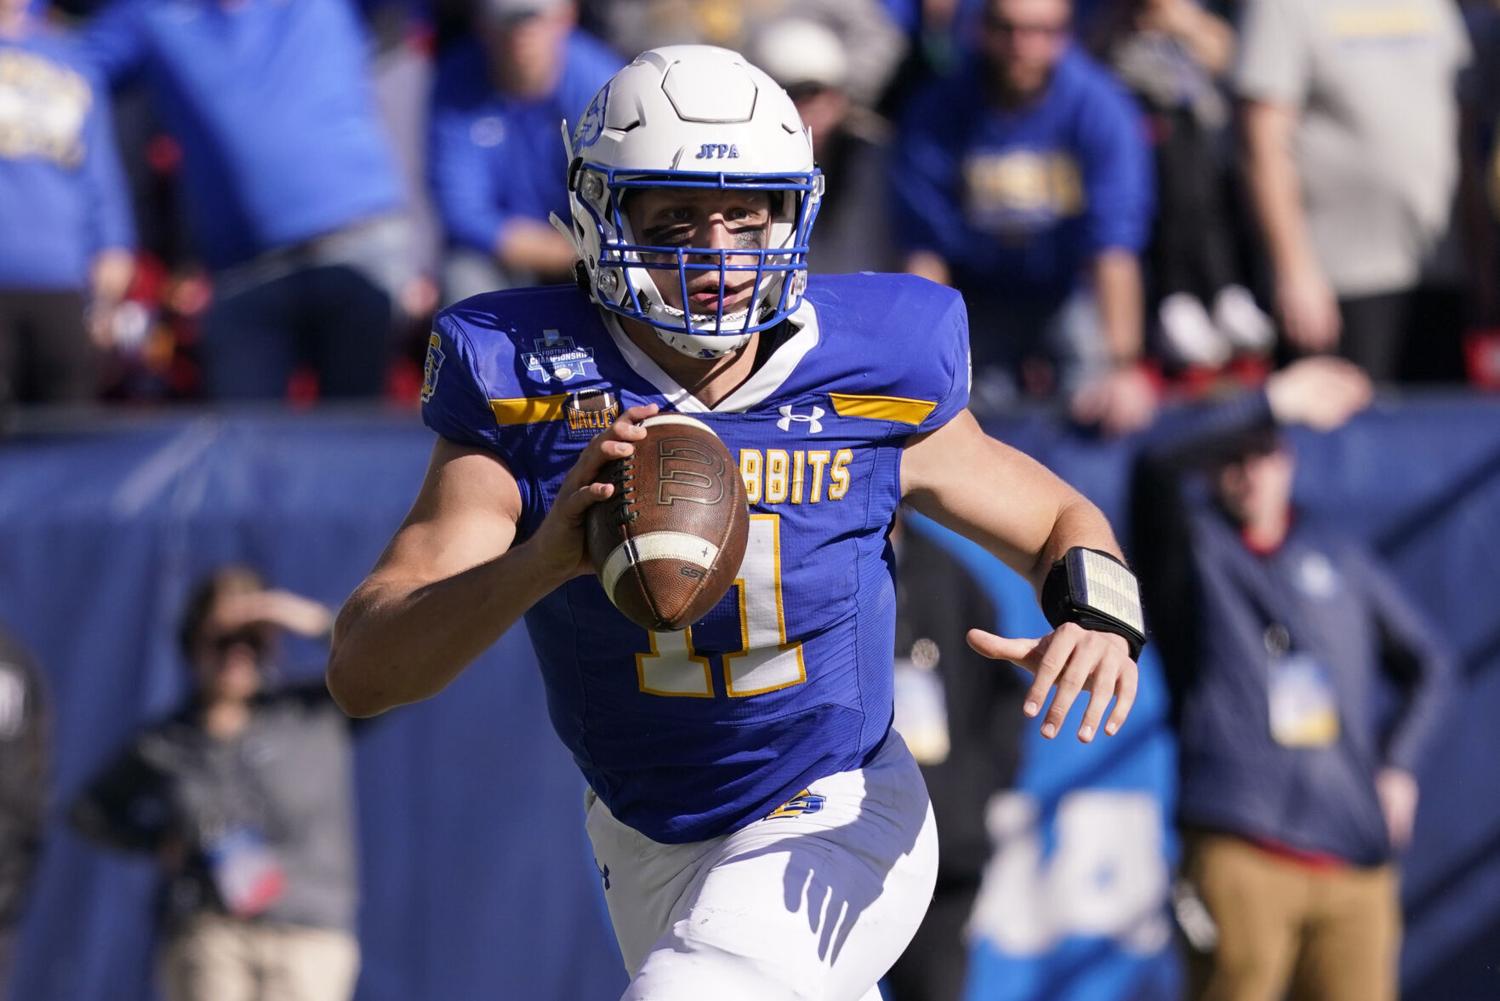 SDSU hosts Montana State for yearly Beef Bowl game